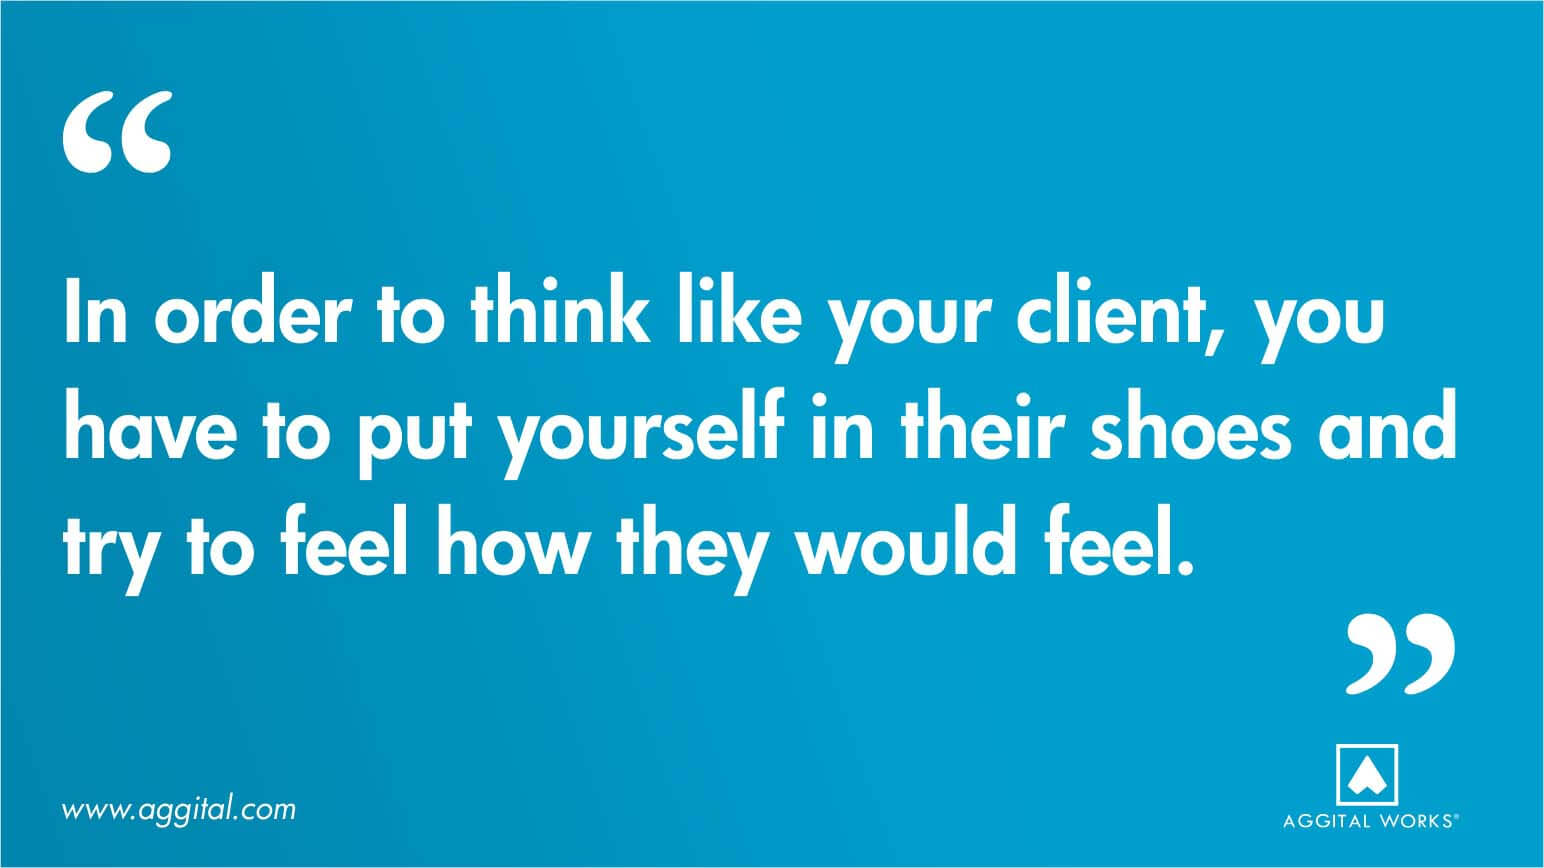 How To Think Like Your Client